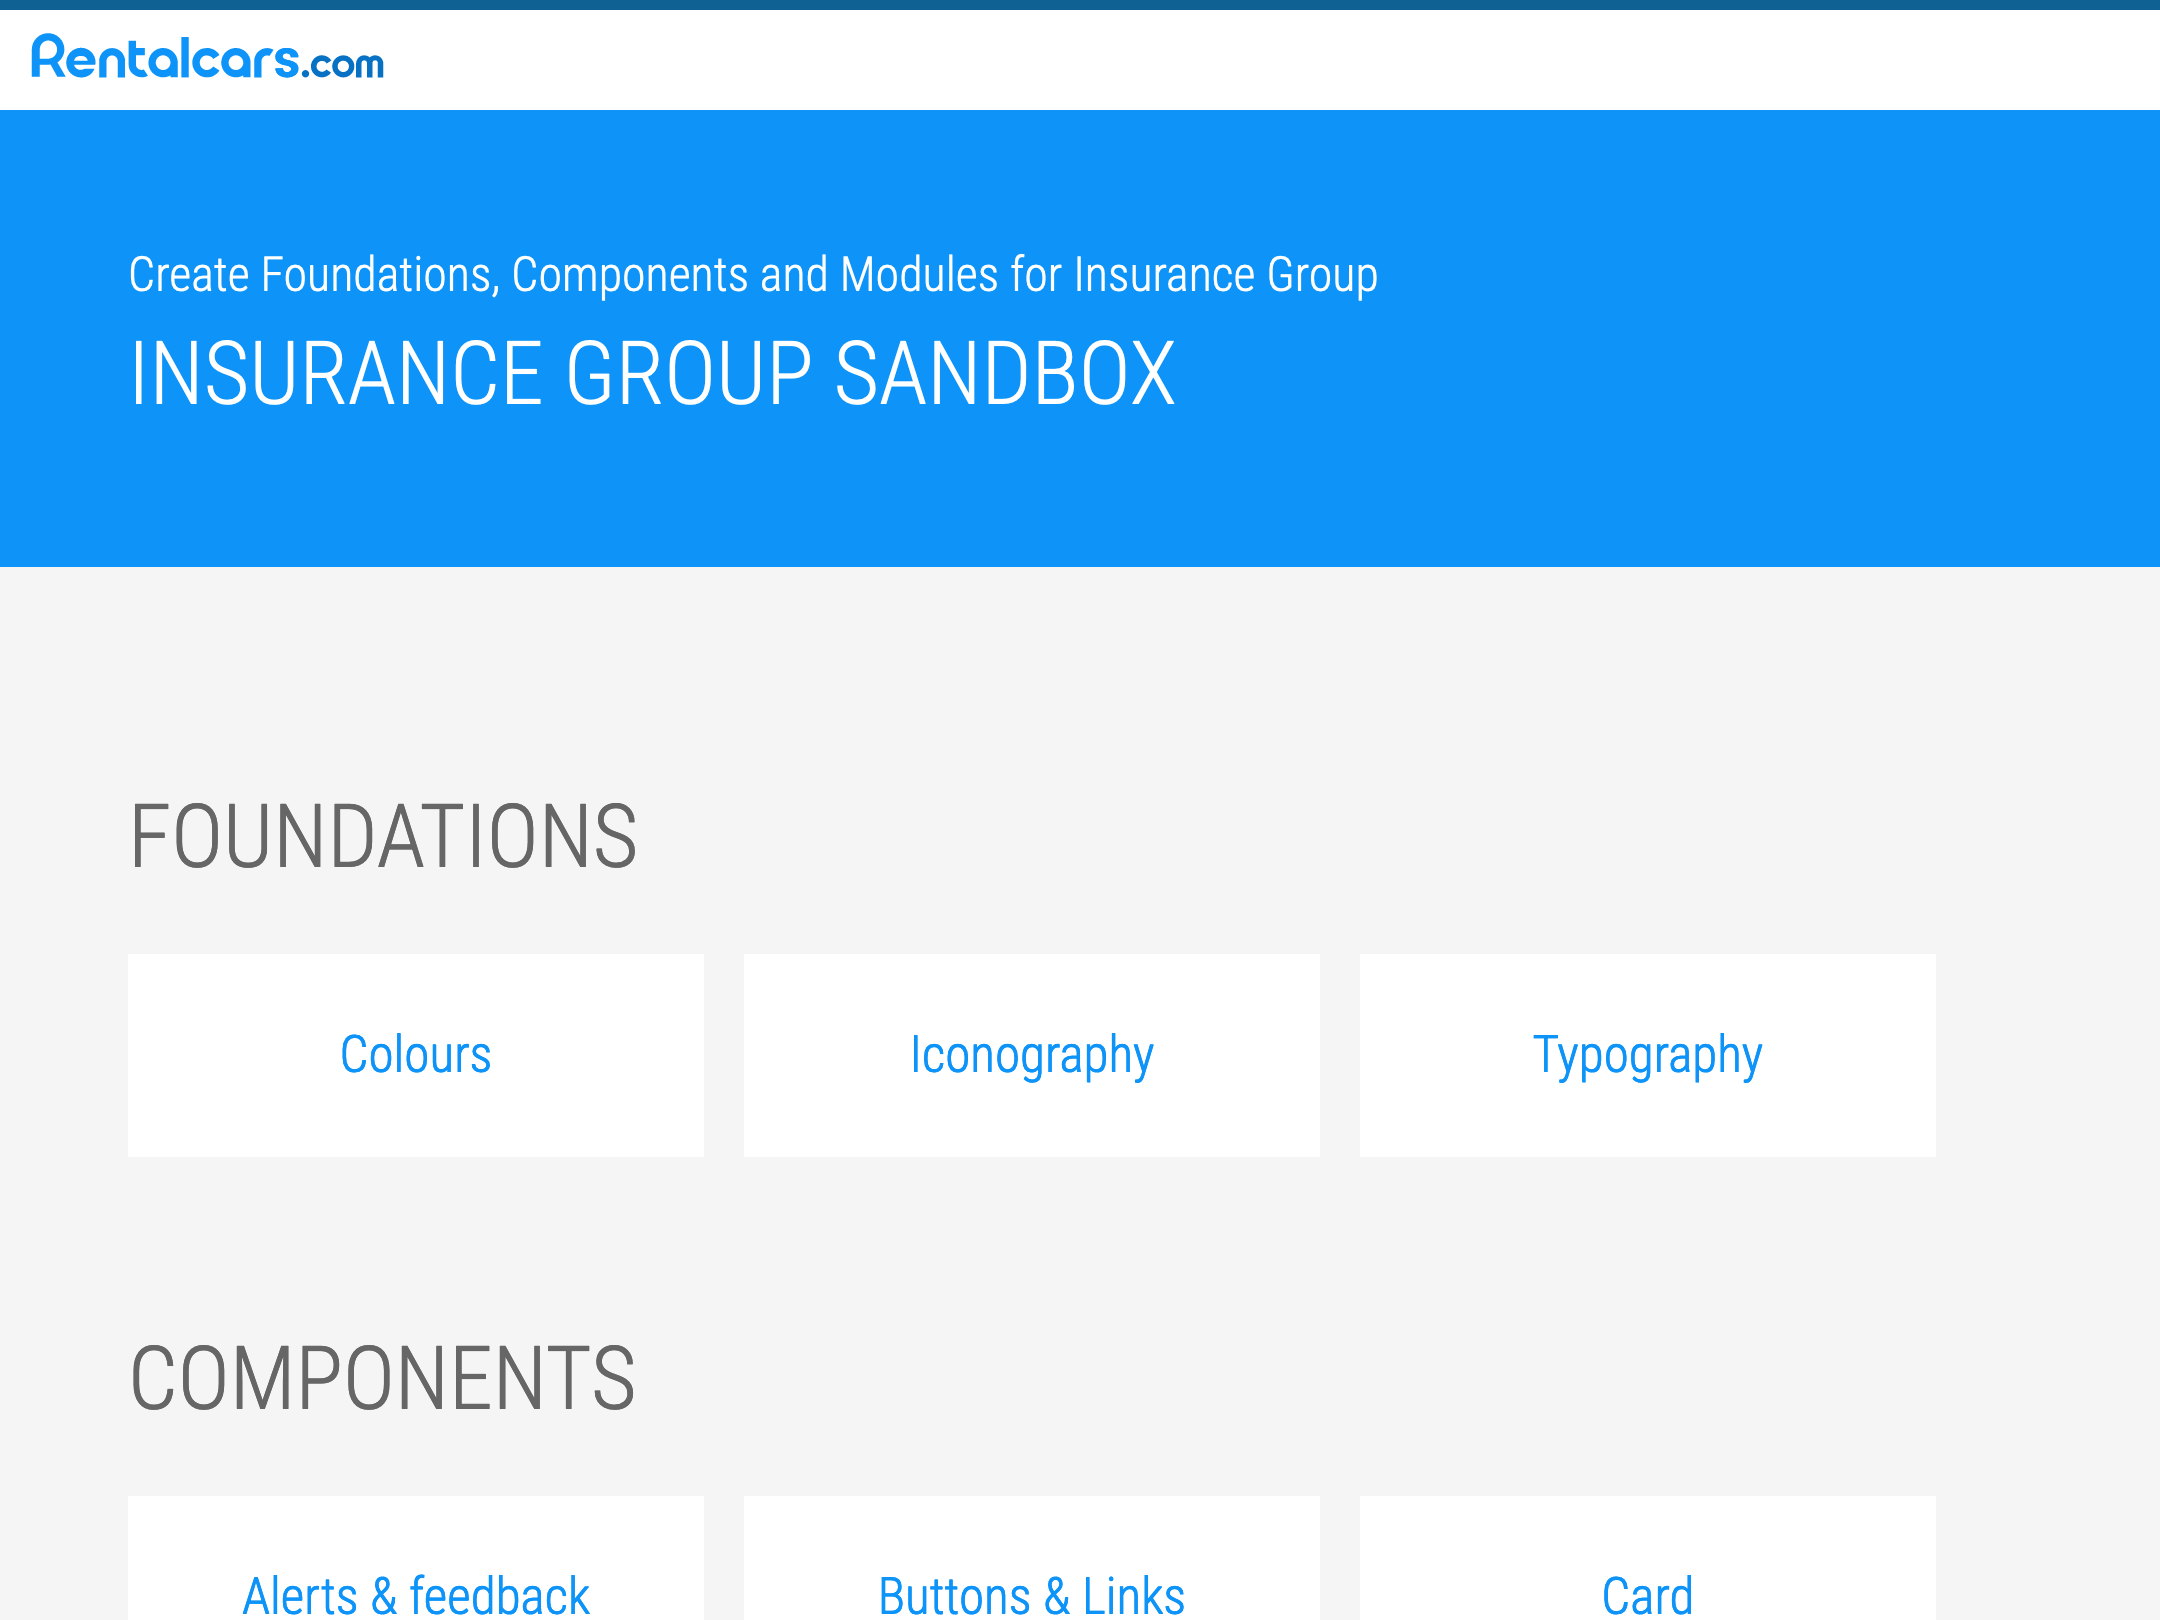 Screenshot of the home page of the insurance group sandbox